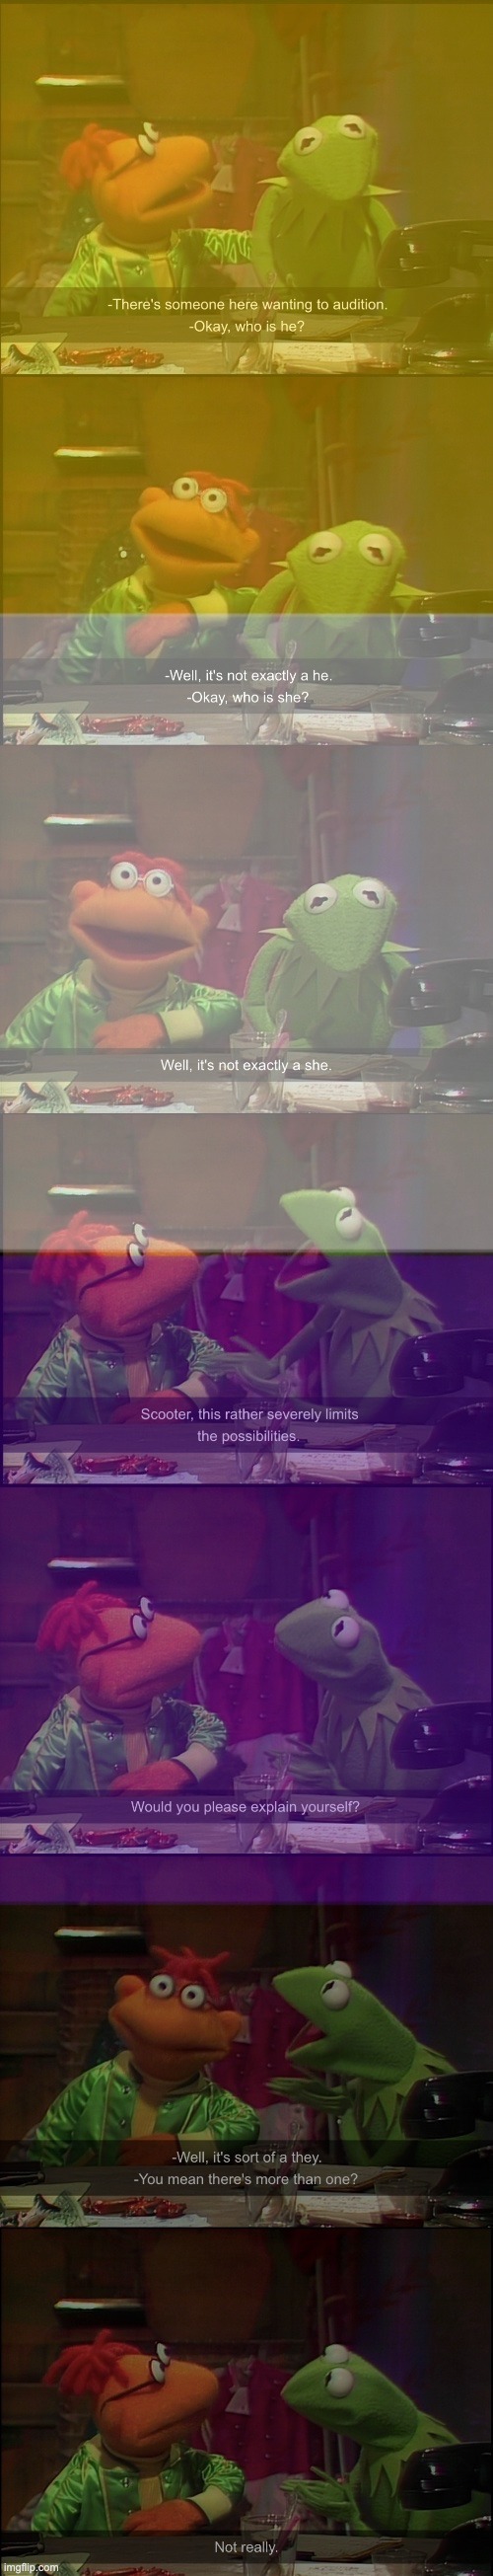 Nonbinary Muppet Show | image tagged in muppets,nonbinary,transgender,outofcontext | made w/ Imgflip meme maker